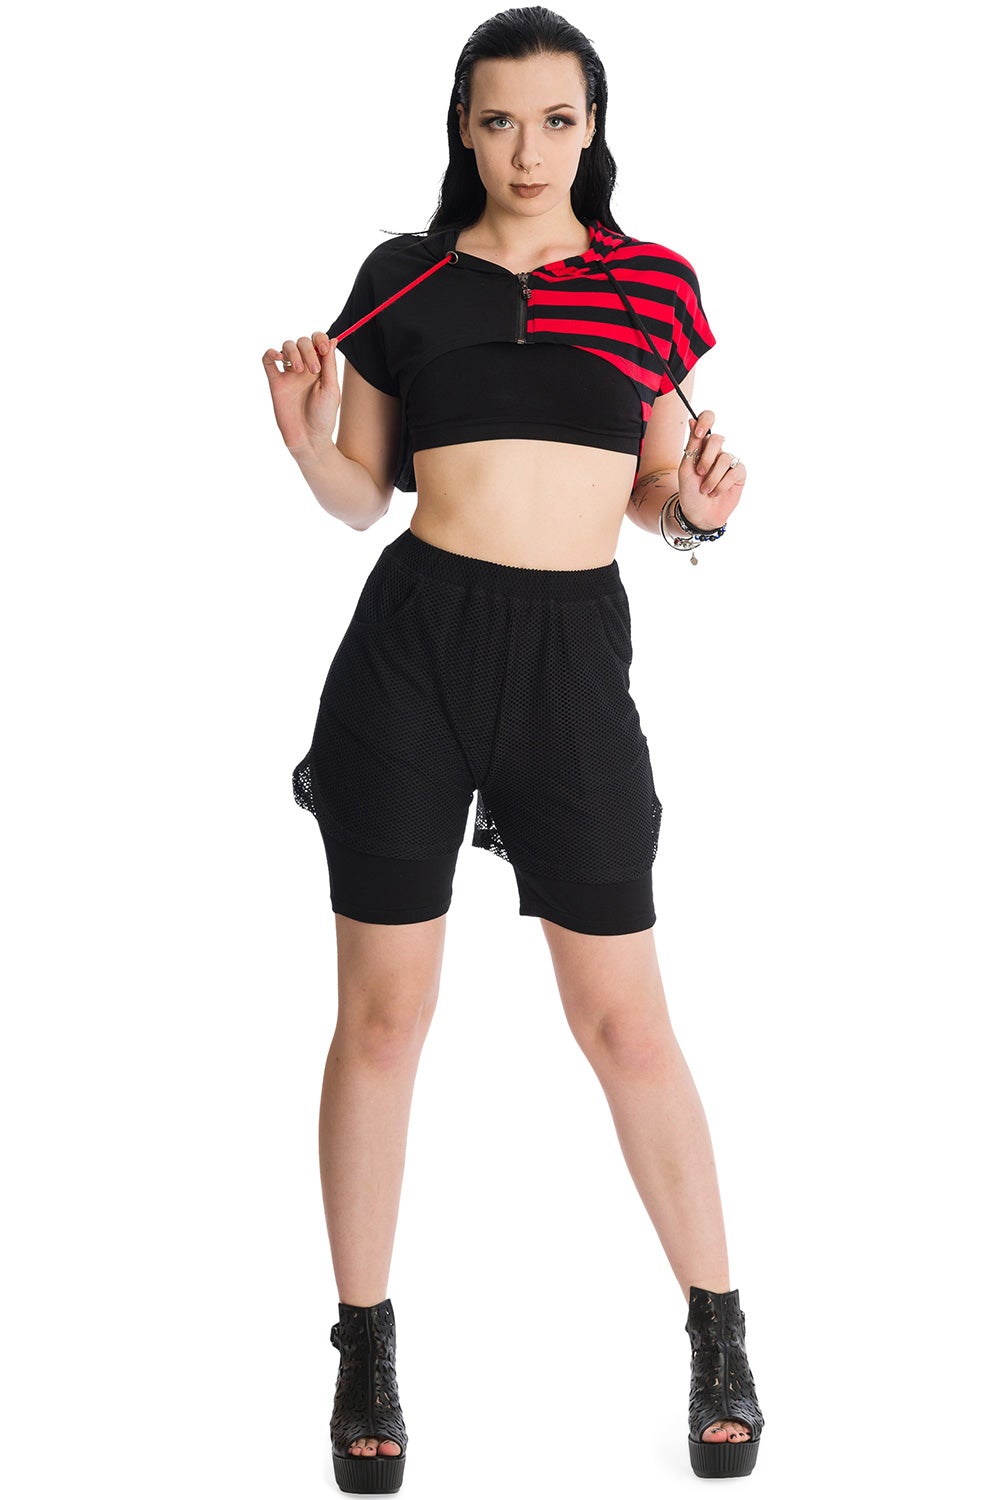 Alternative model in cropped half red strip and half black hoodie and black shorts.